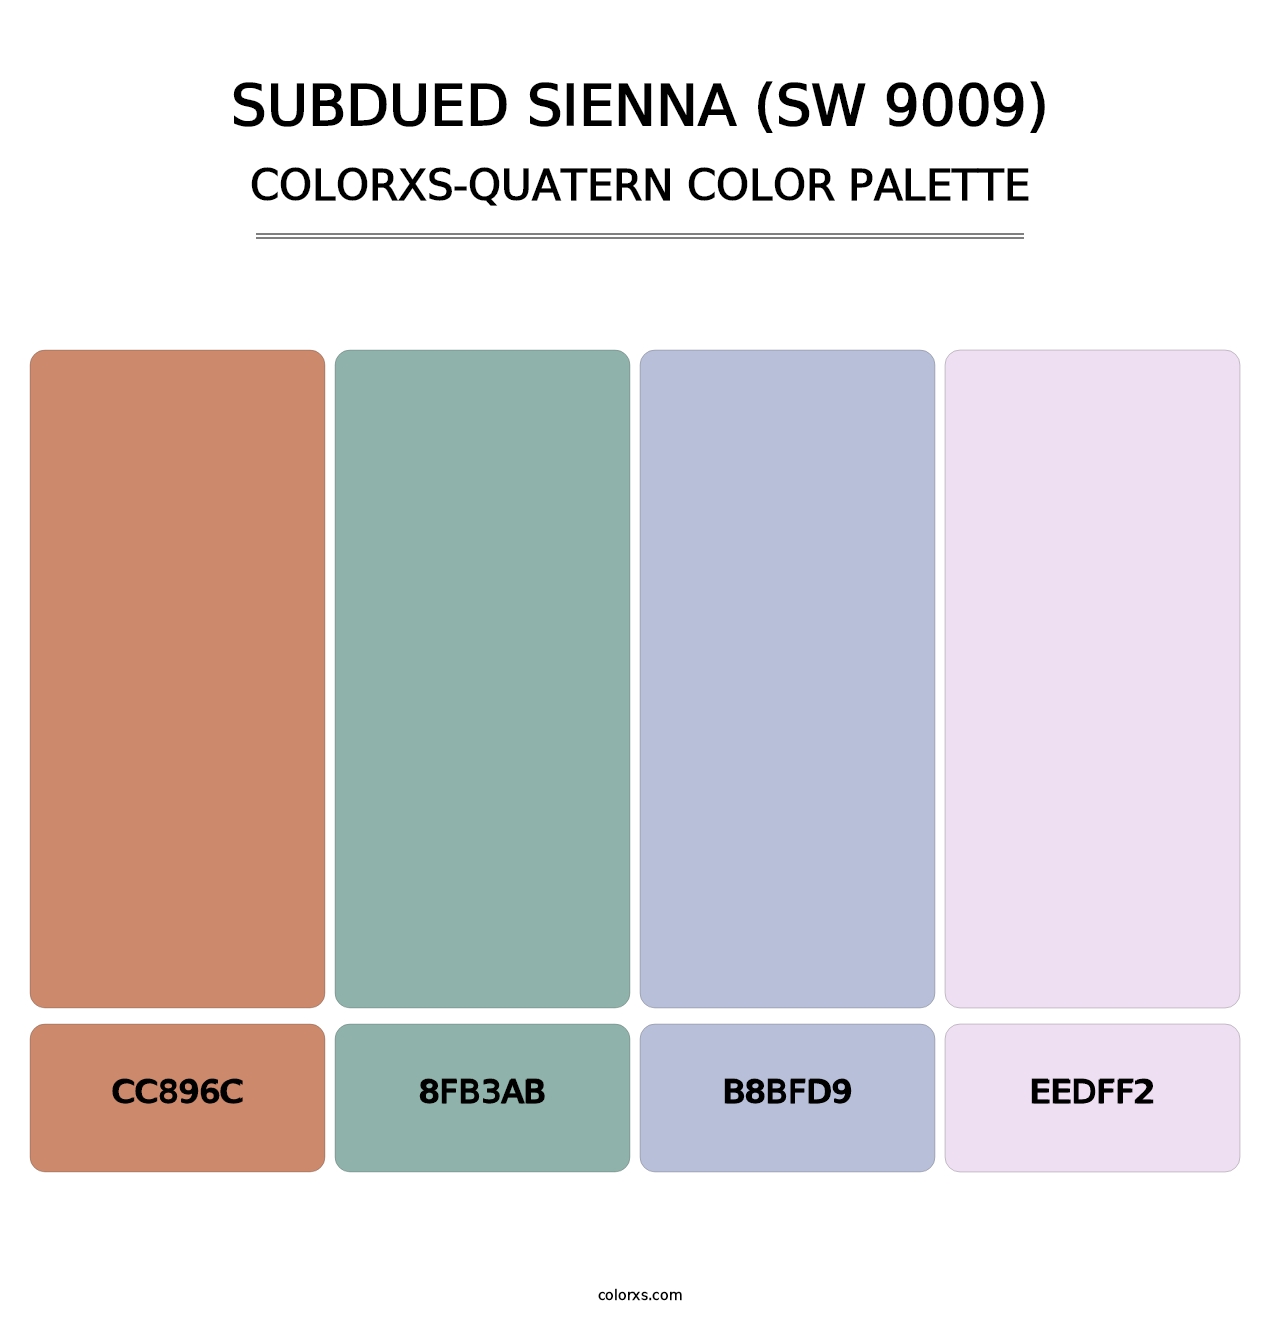 Subdued Sienna (SW 9009) - Colorxs Quatern Palette